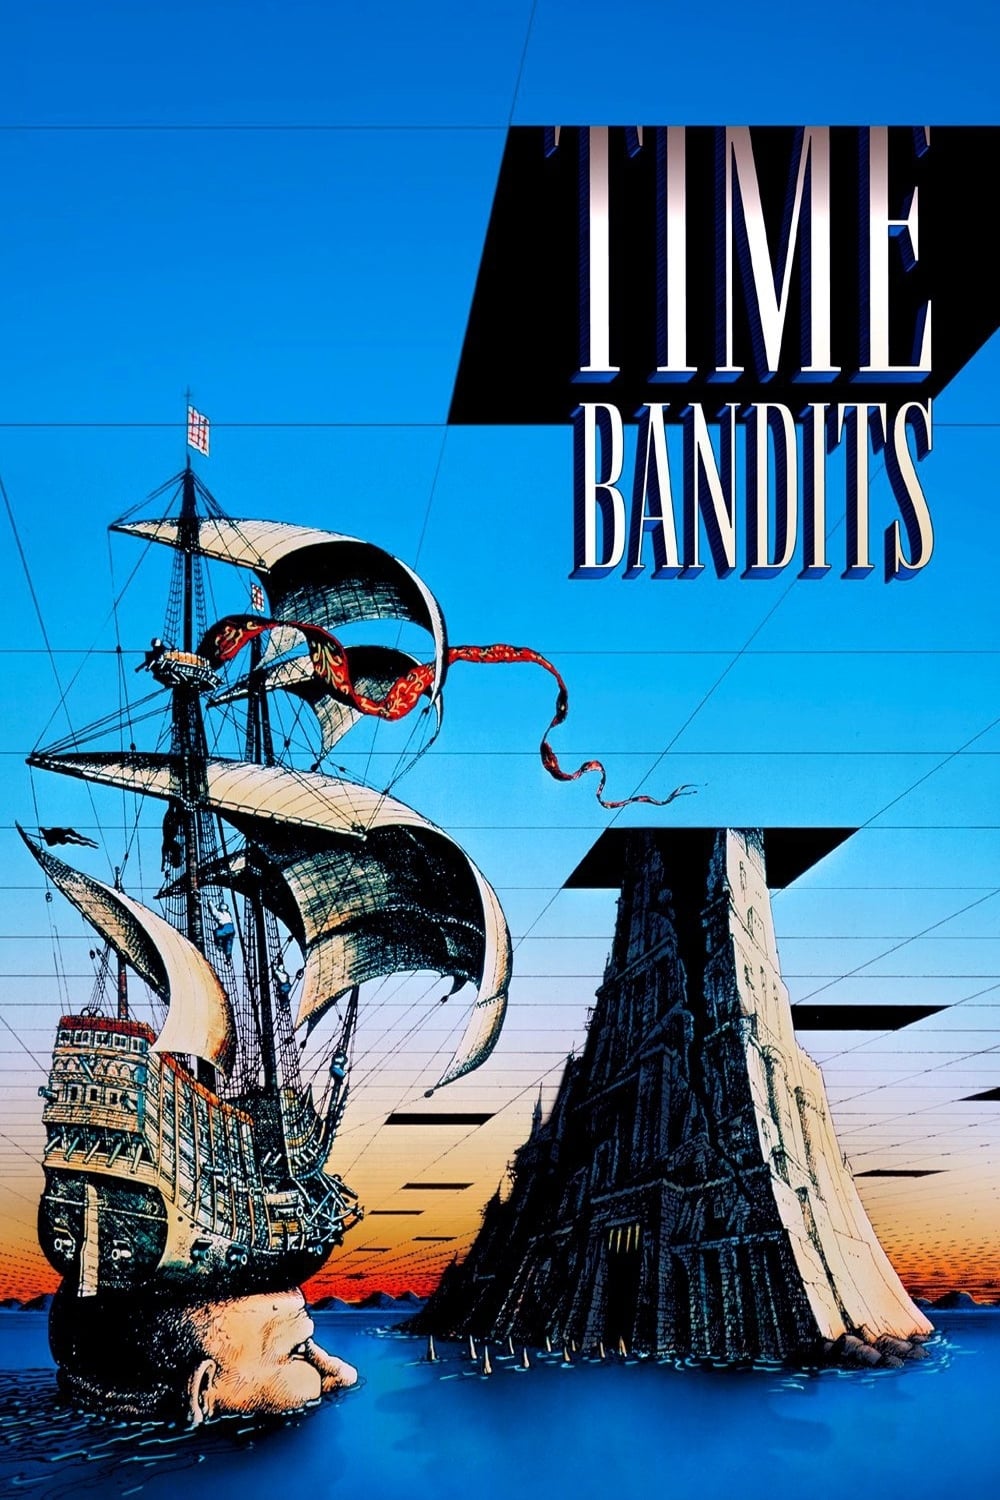 Poster for the movie "Time Bandits"